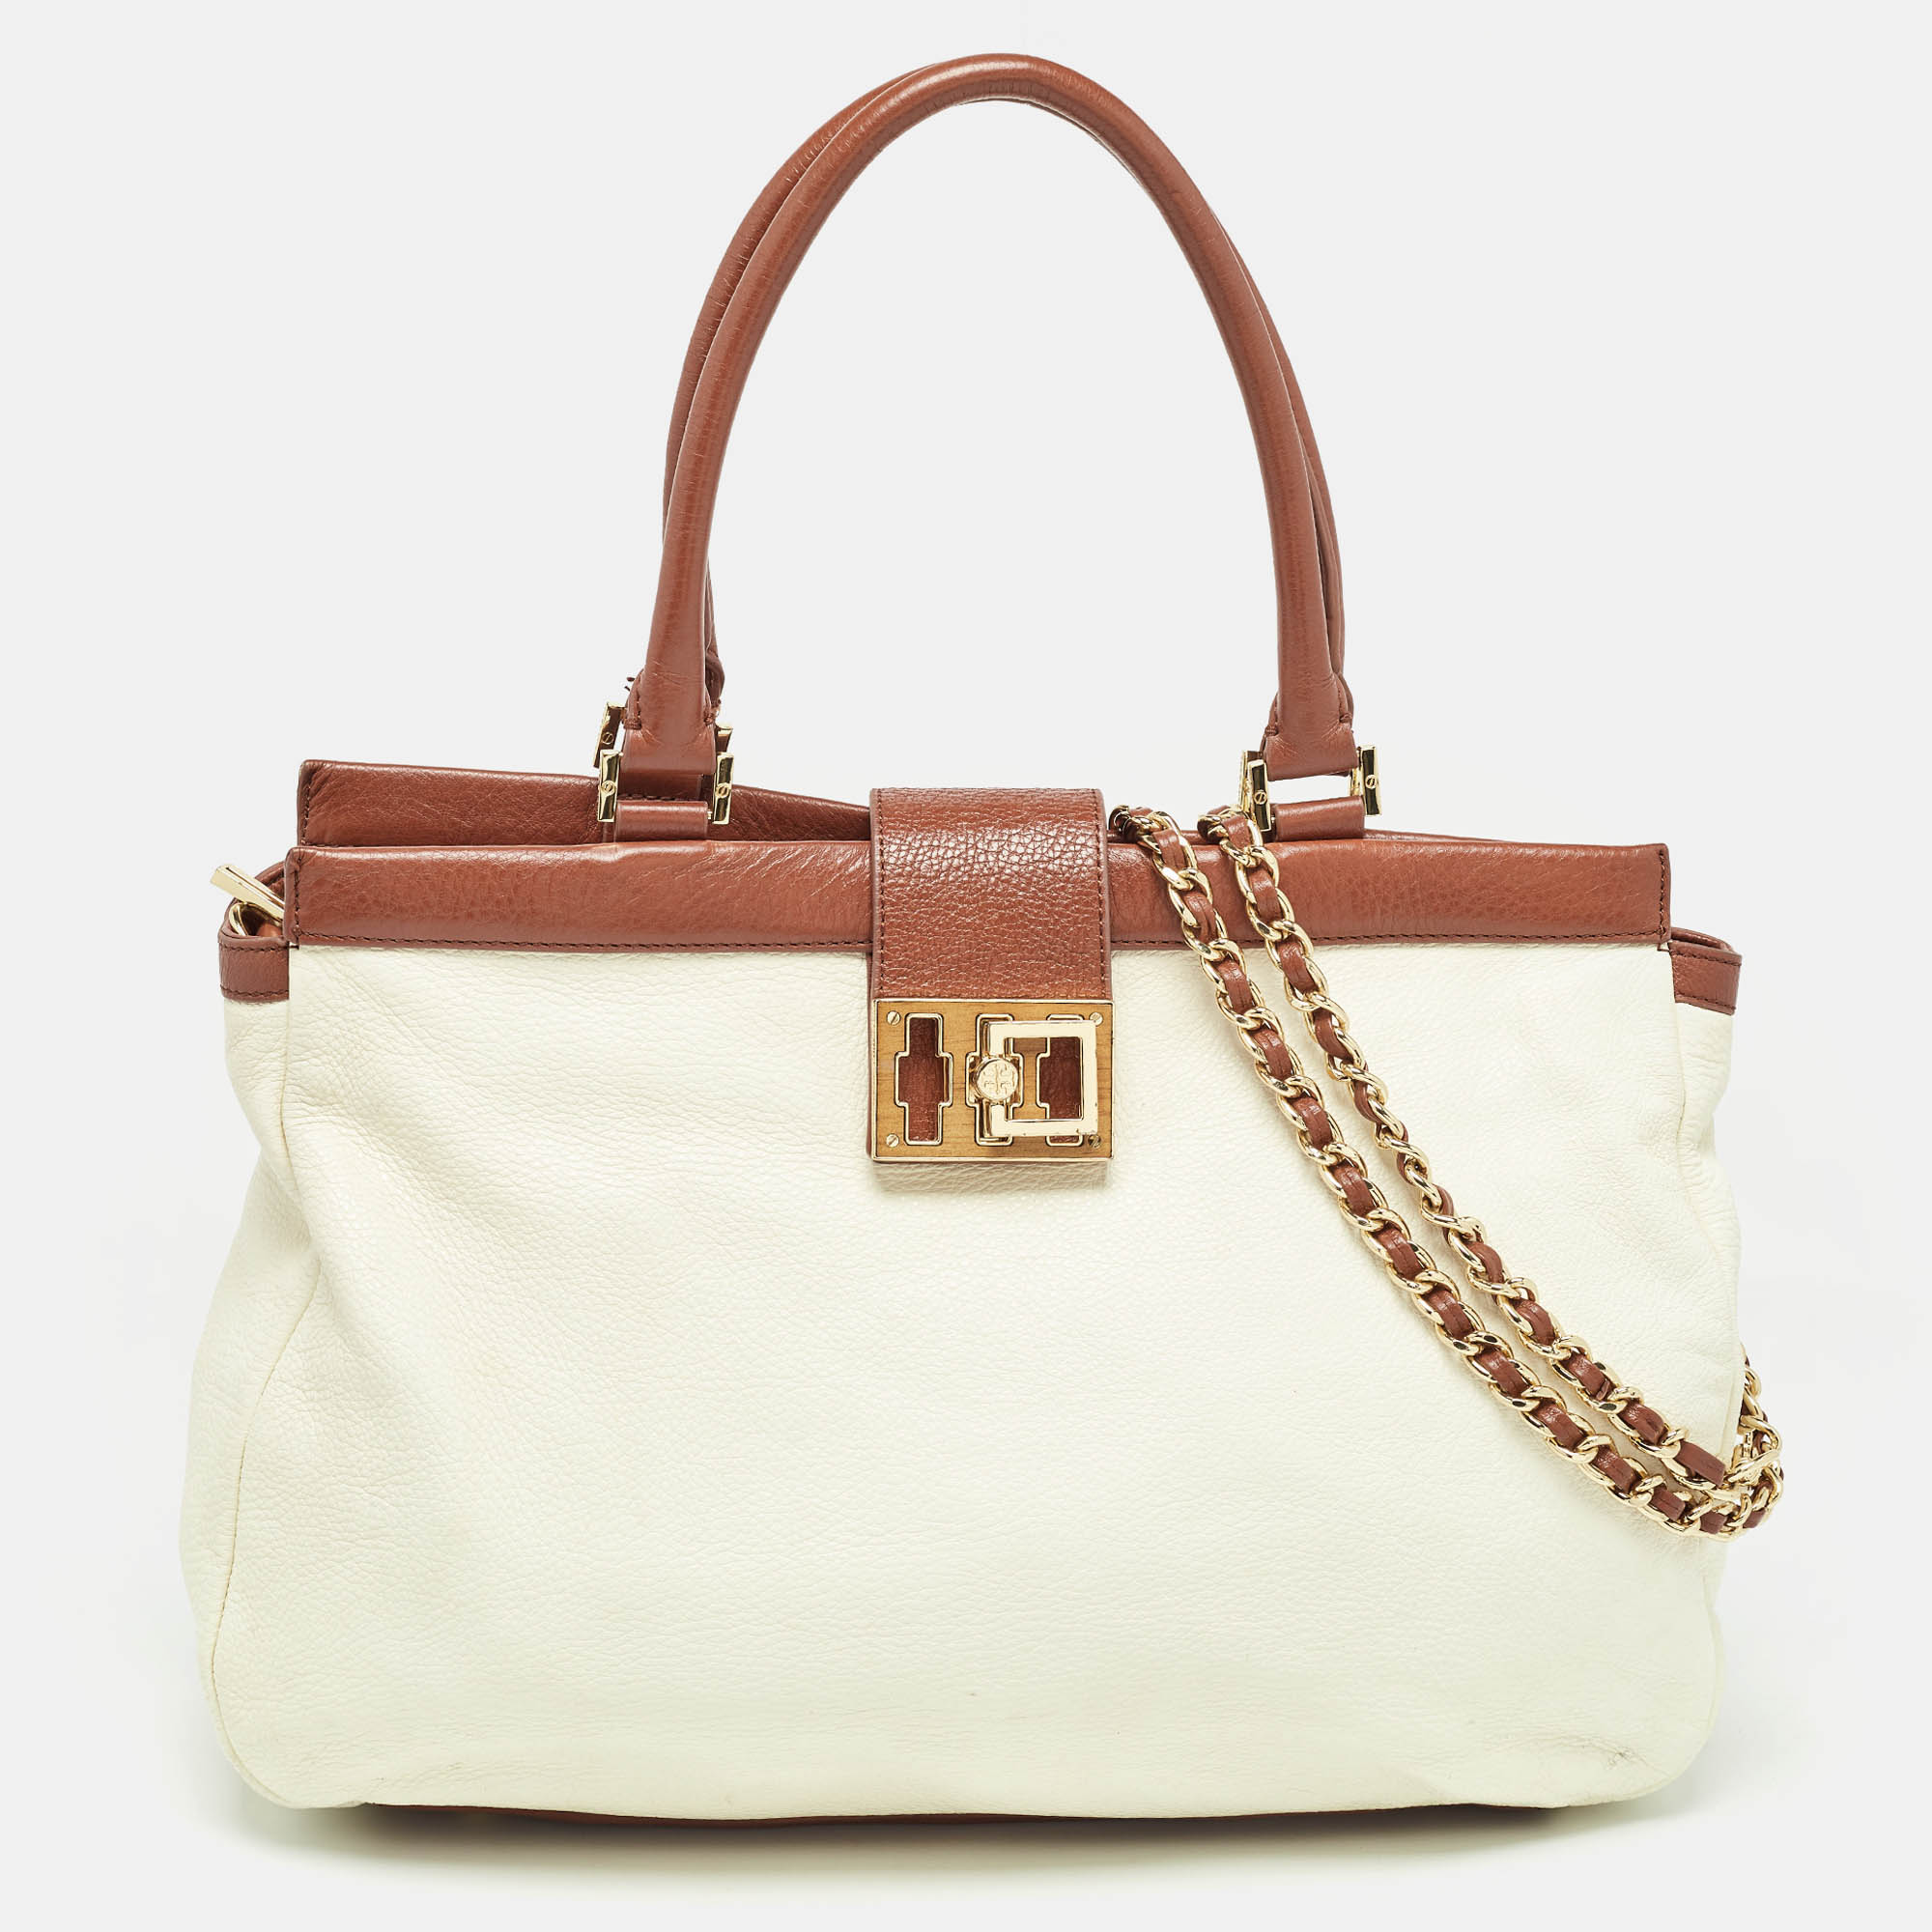 Pre-owned Tory Burch Cream/brown Leather Tote